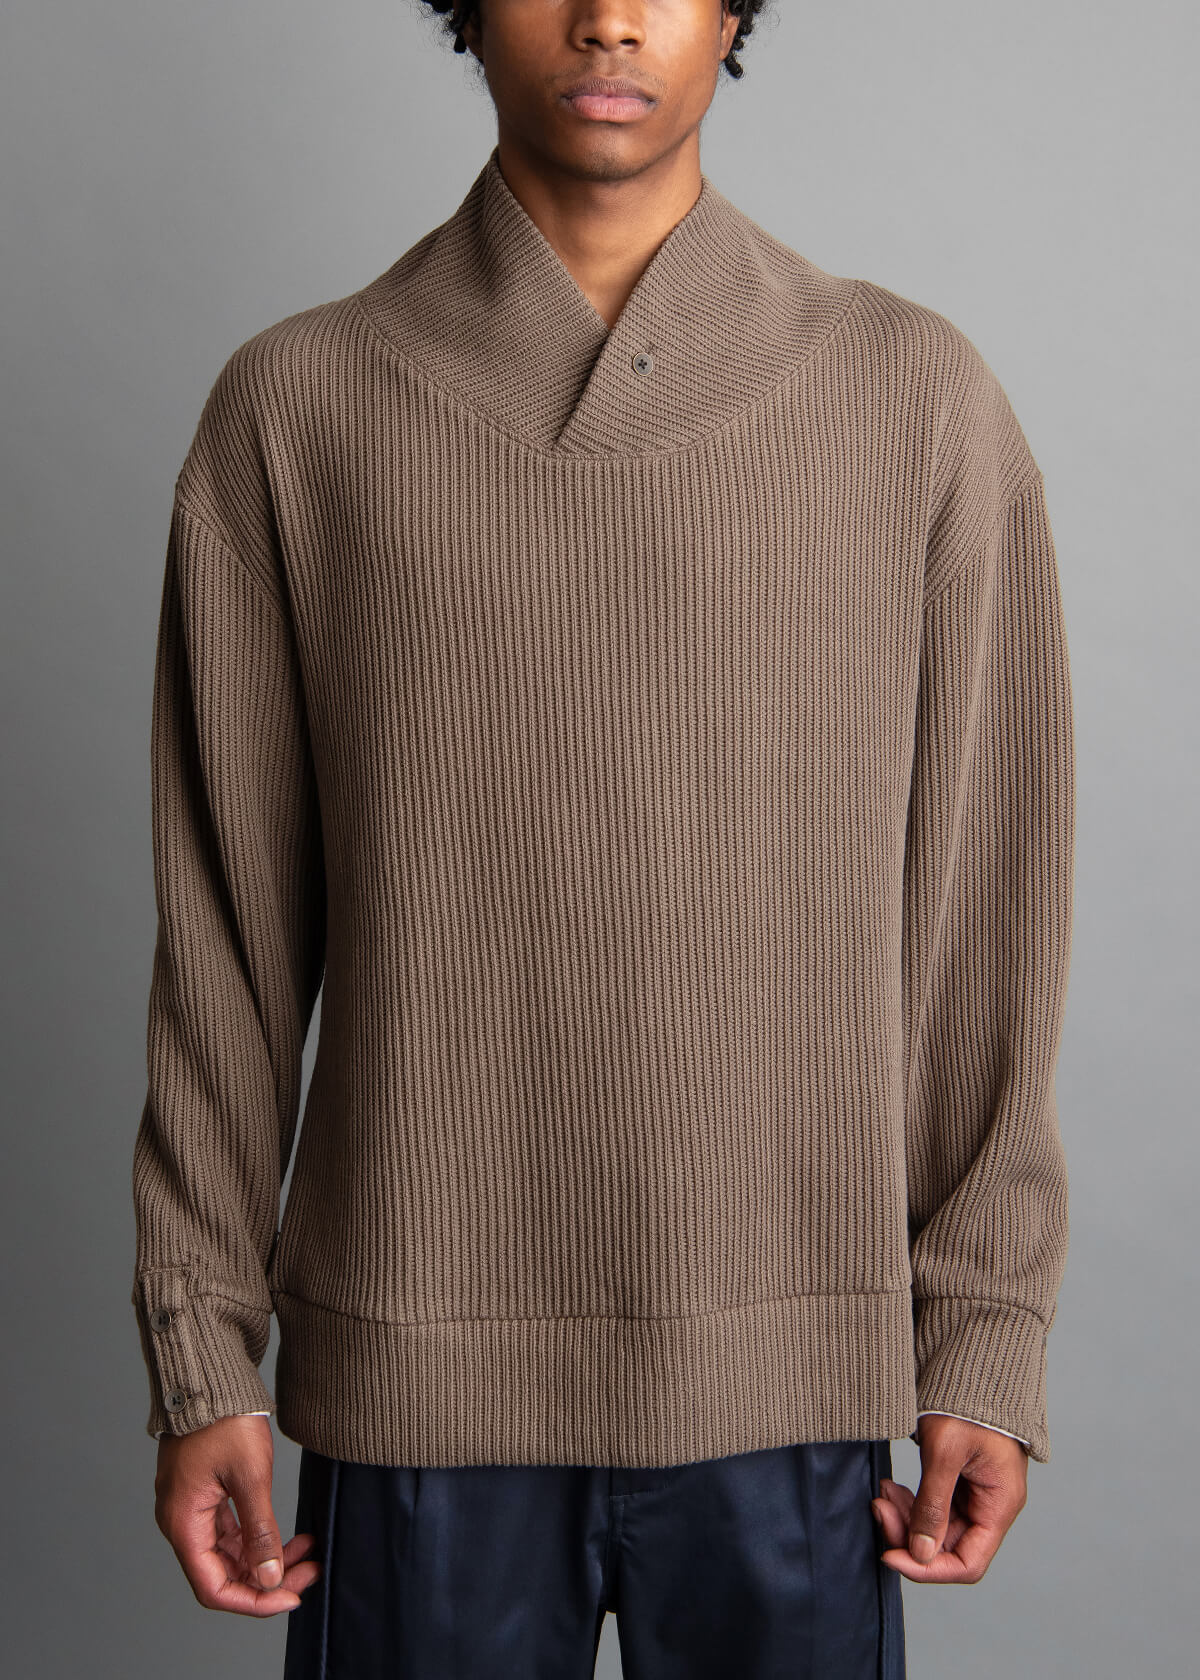 olive tone mens knitted pullover